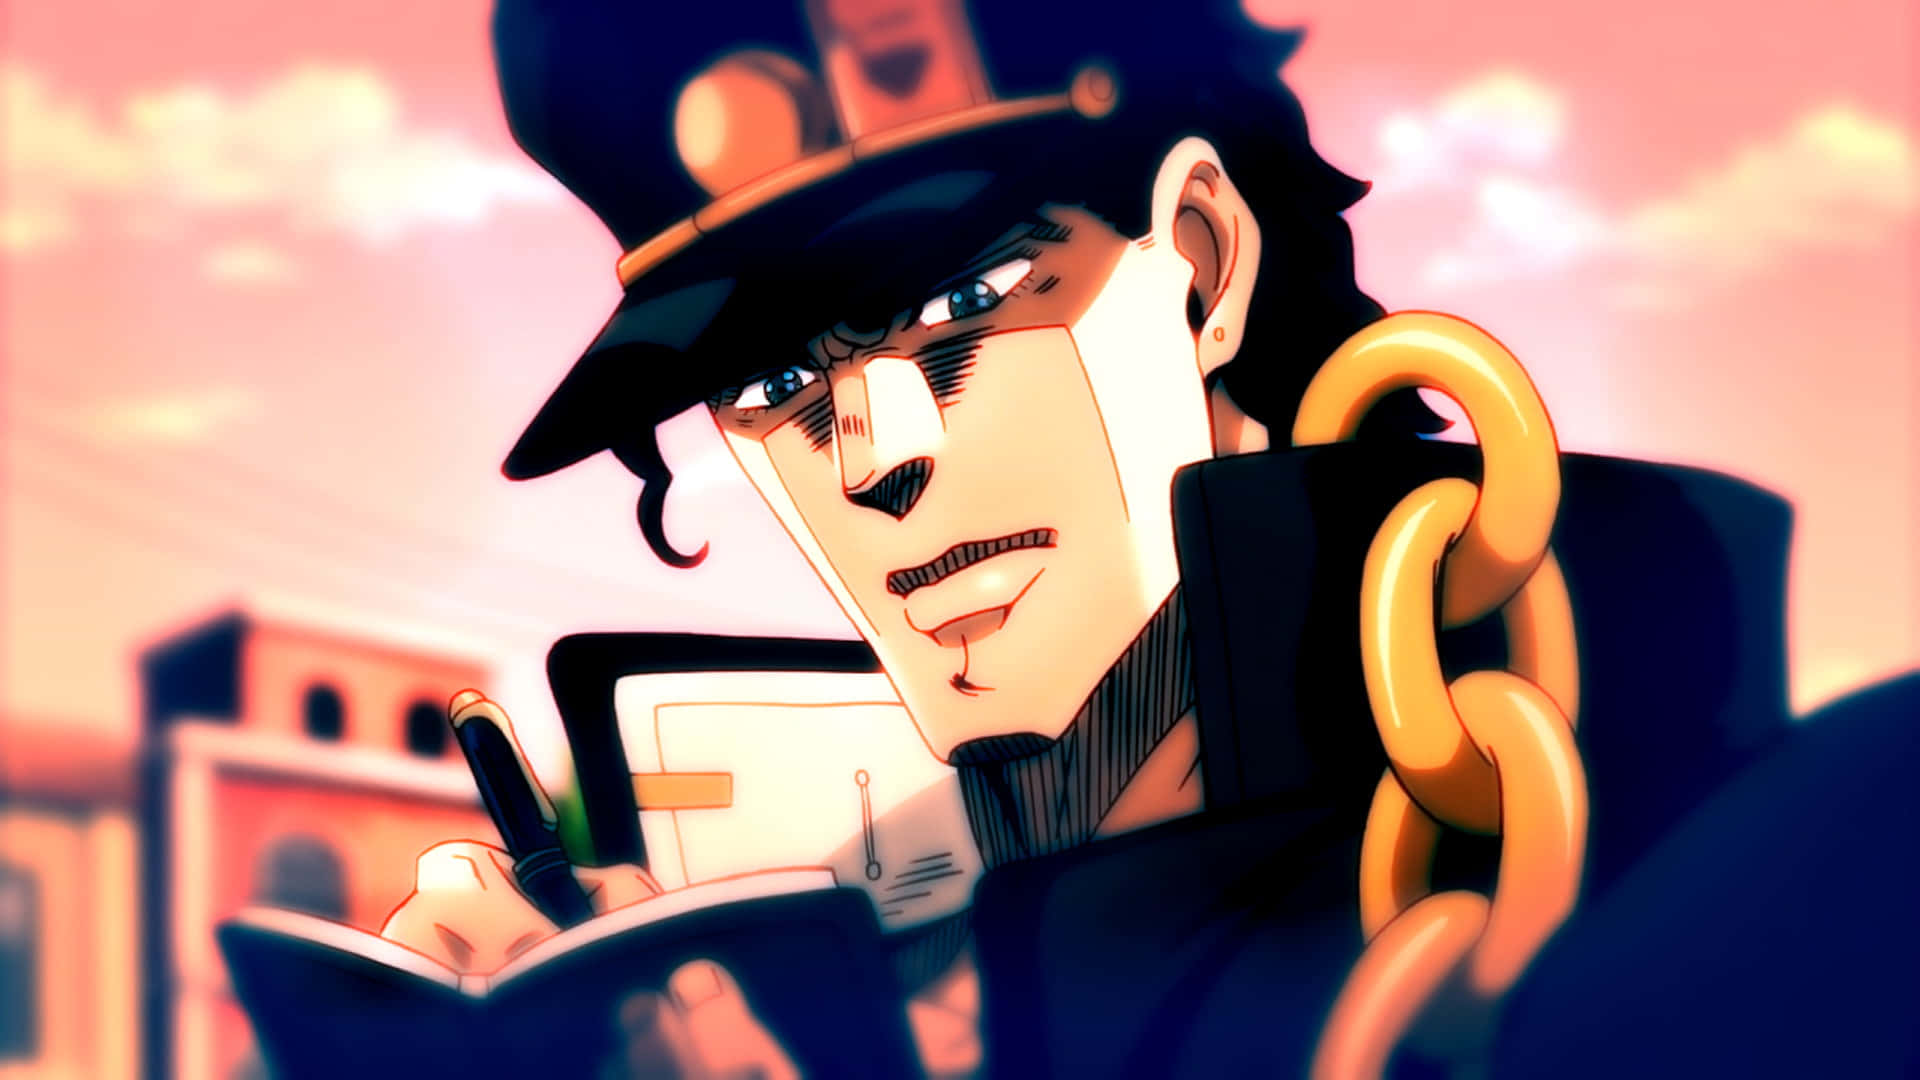 Jotaro Kujo striking a pose in his iconic outfit Wallpaper